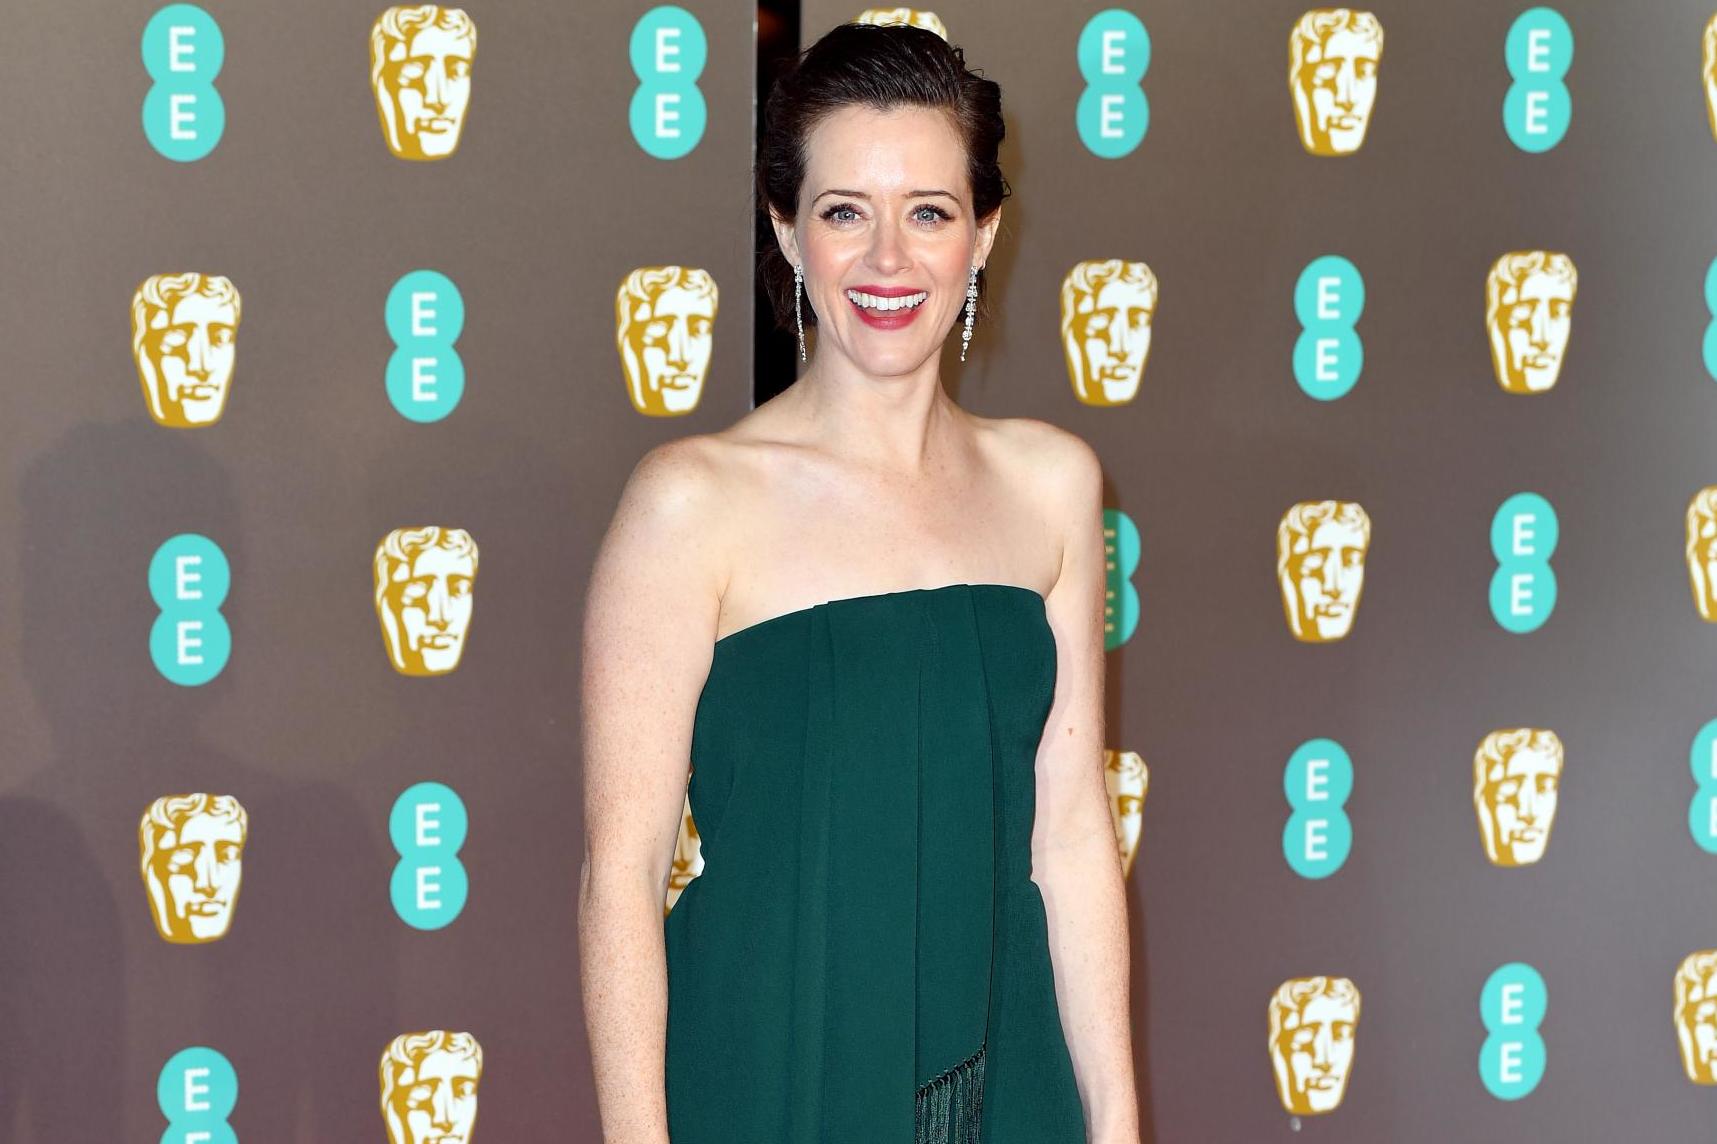 Claire Foy will be officially replaced by Olivia Colman in ‘The Crown’ later this month